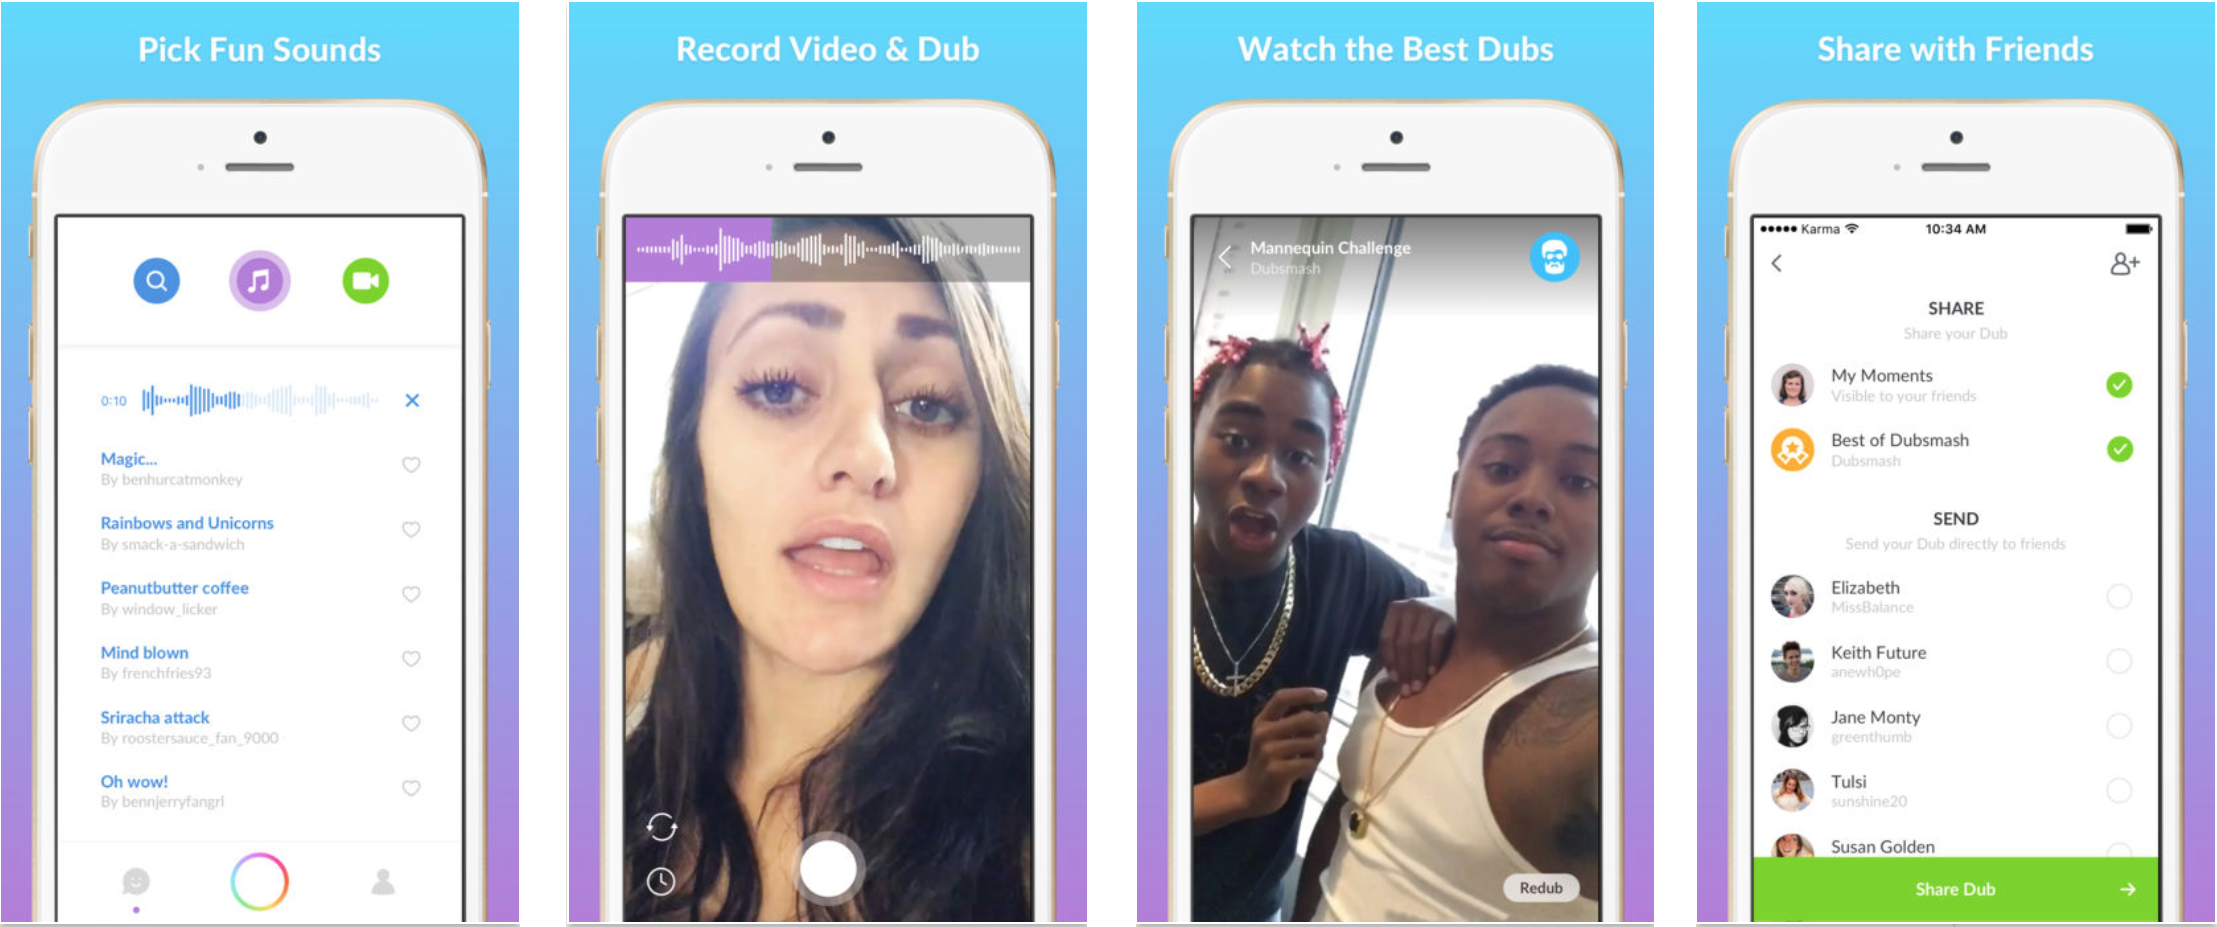 Is Dubsmash still a thing? Yes, and Reddit just bought it